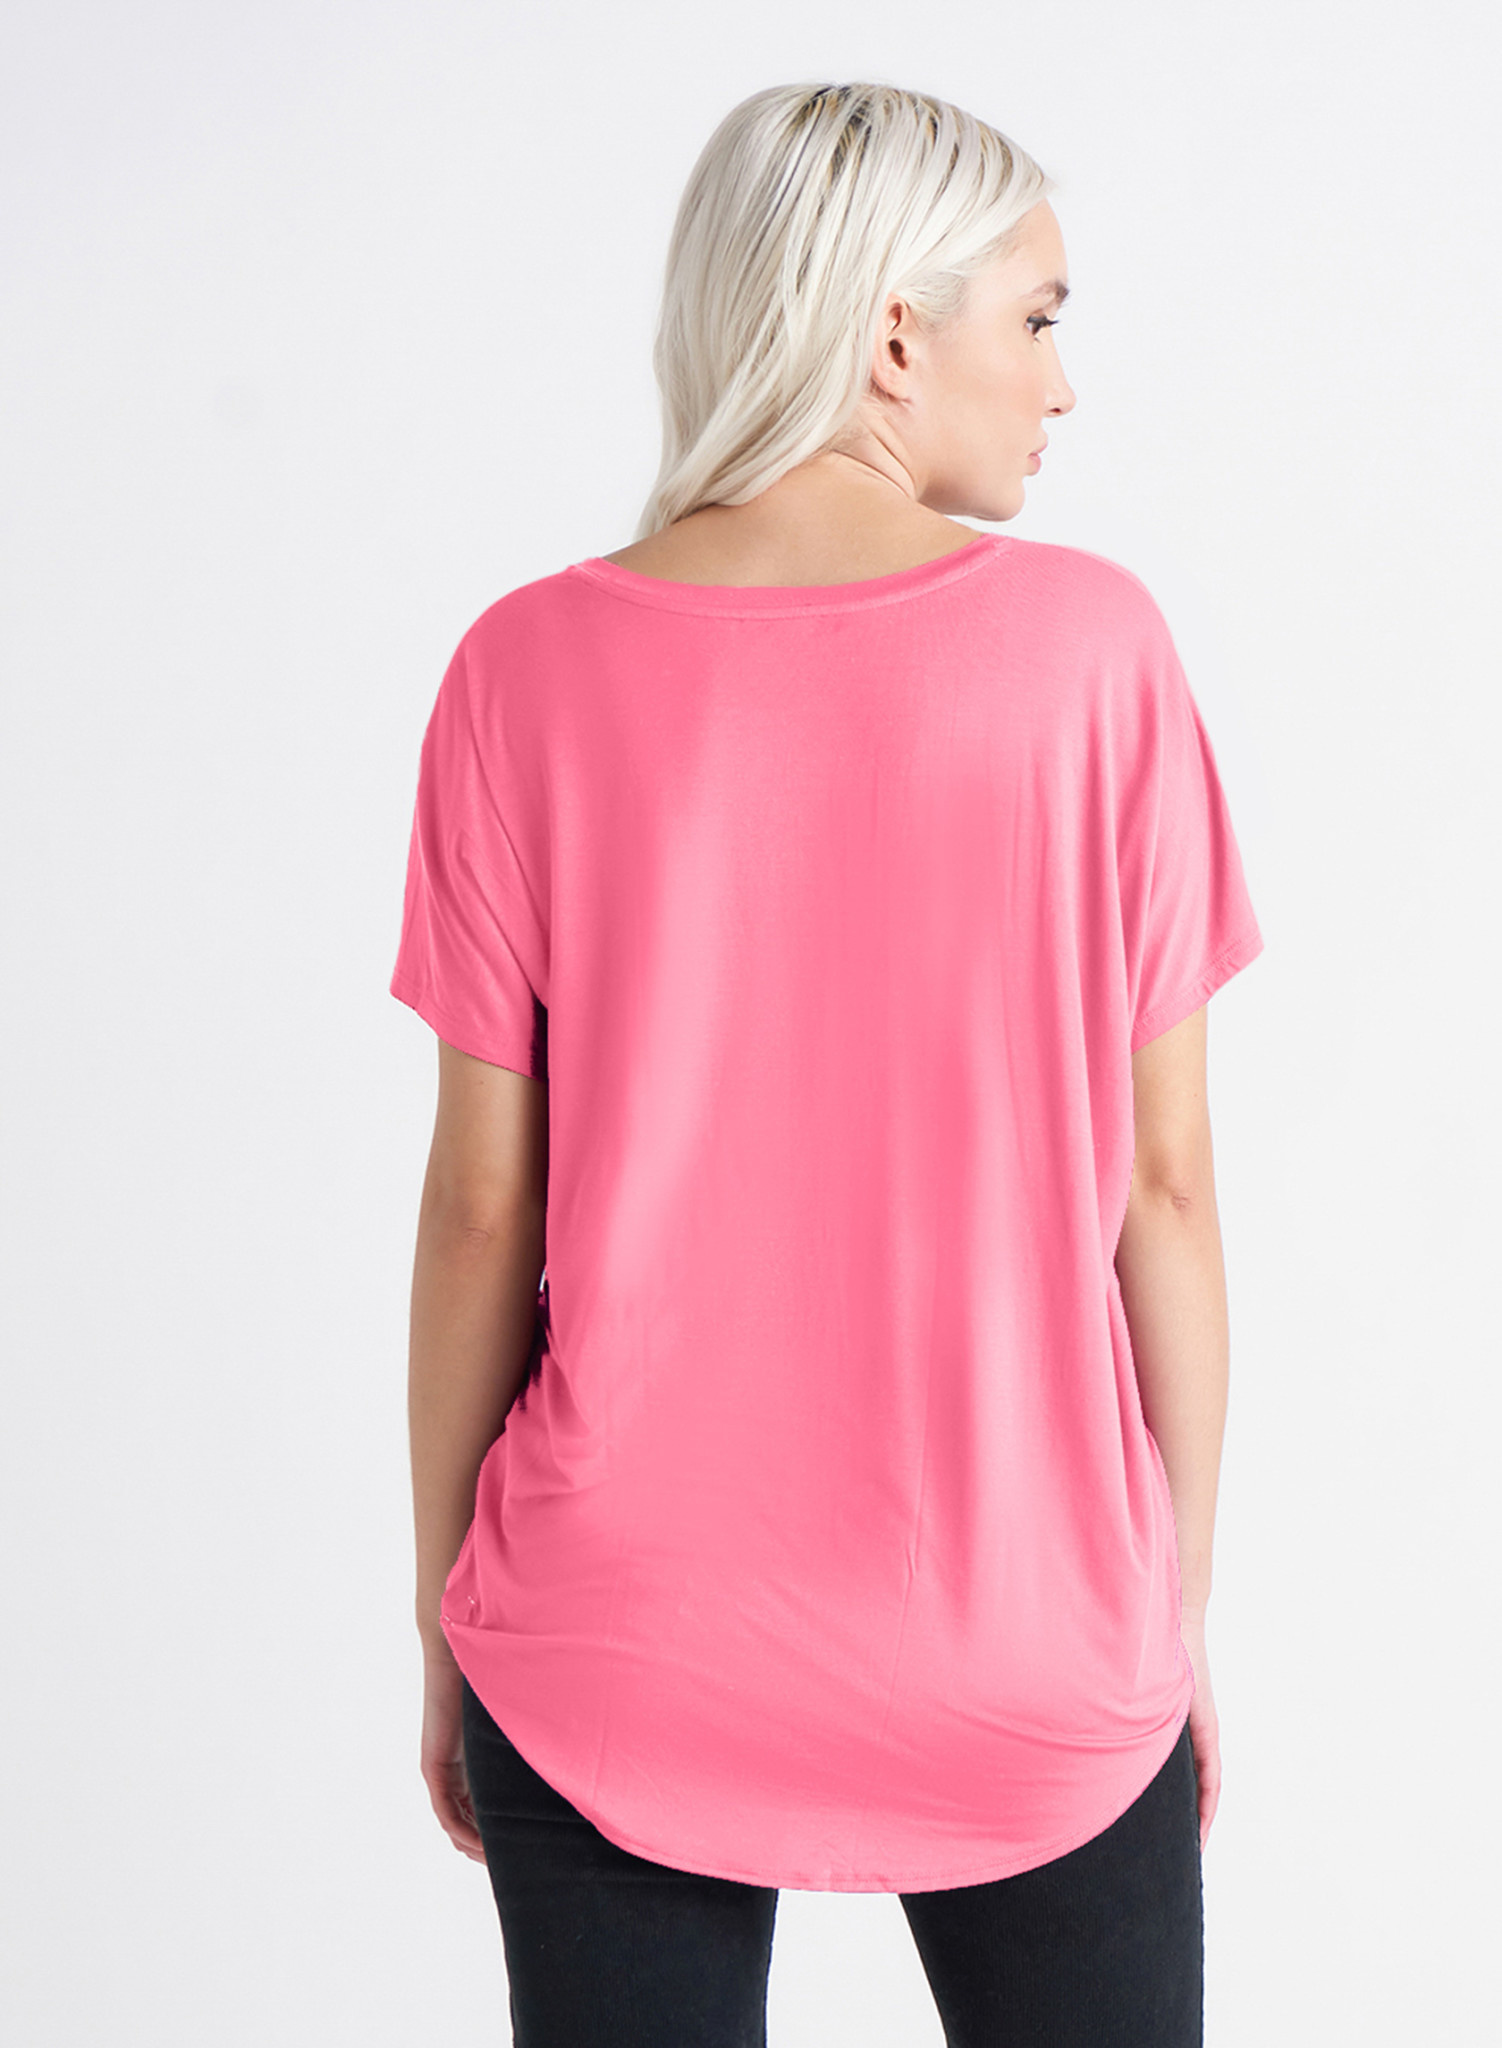 Hot Pink Tee - Thelma & Thistle